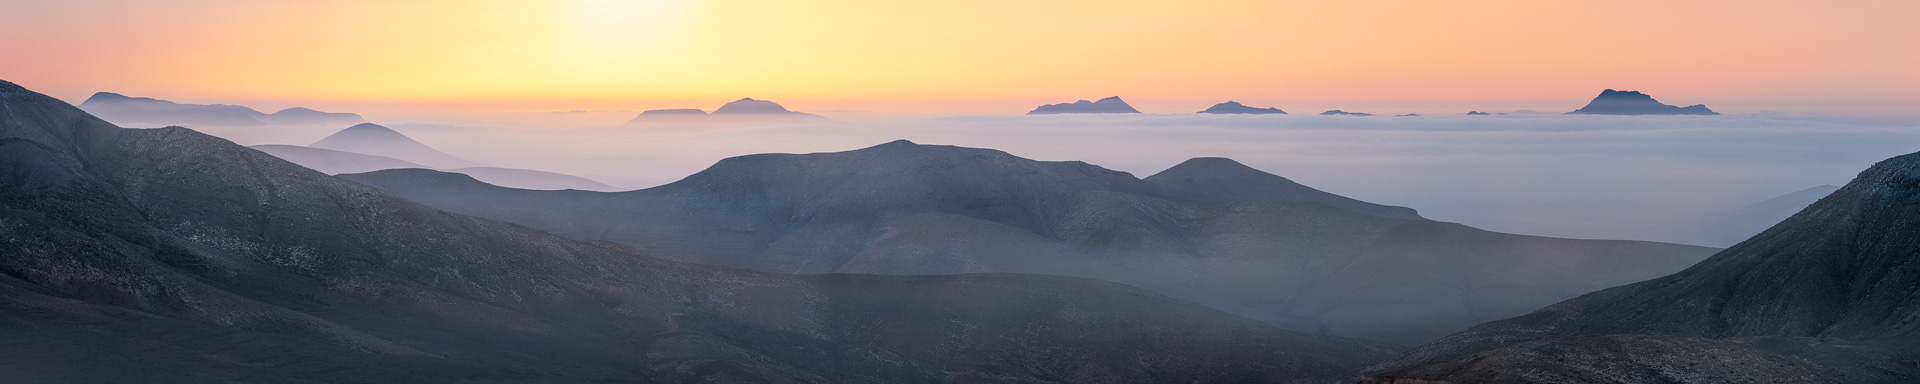 The Mountains of Fuerteventura surrounded by Fog during Sunrise.